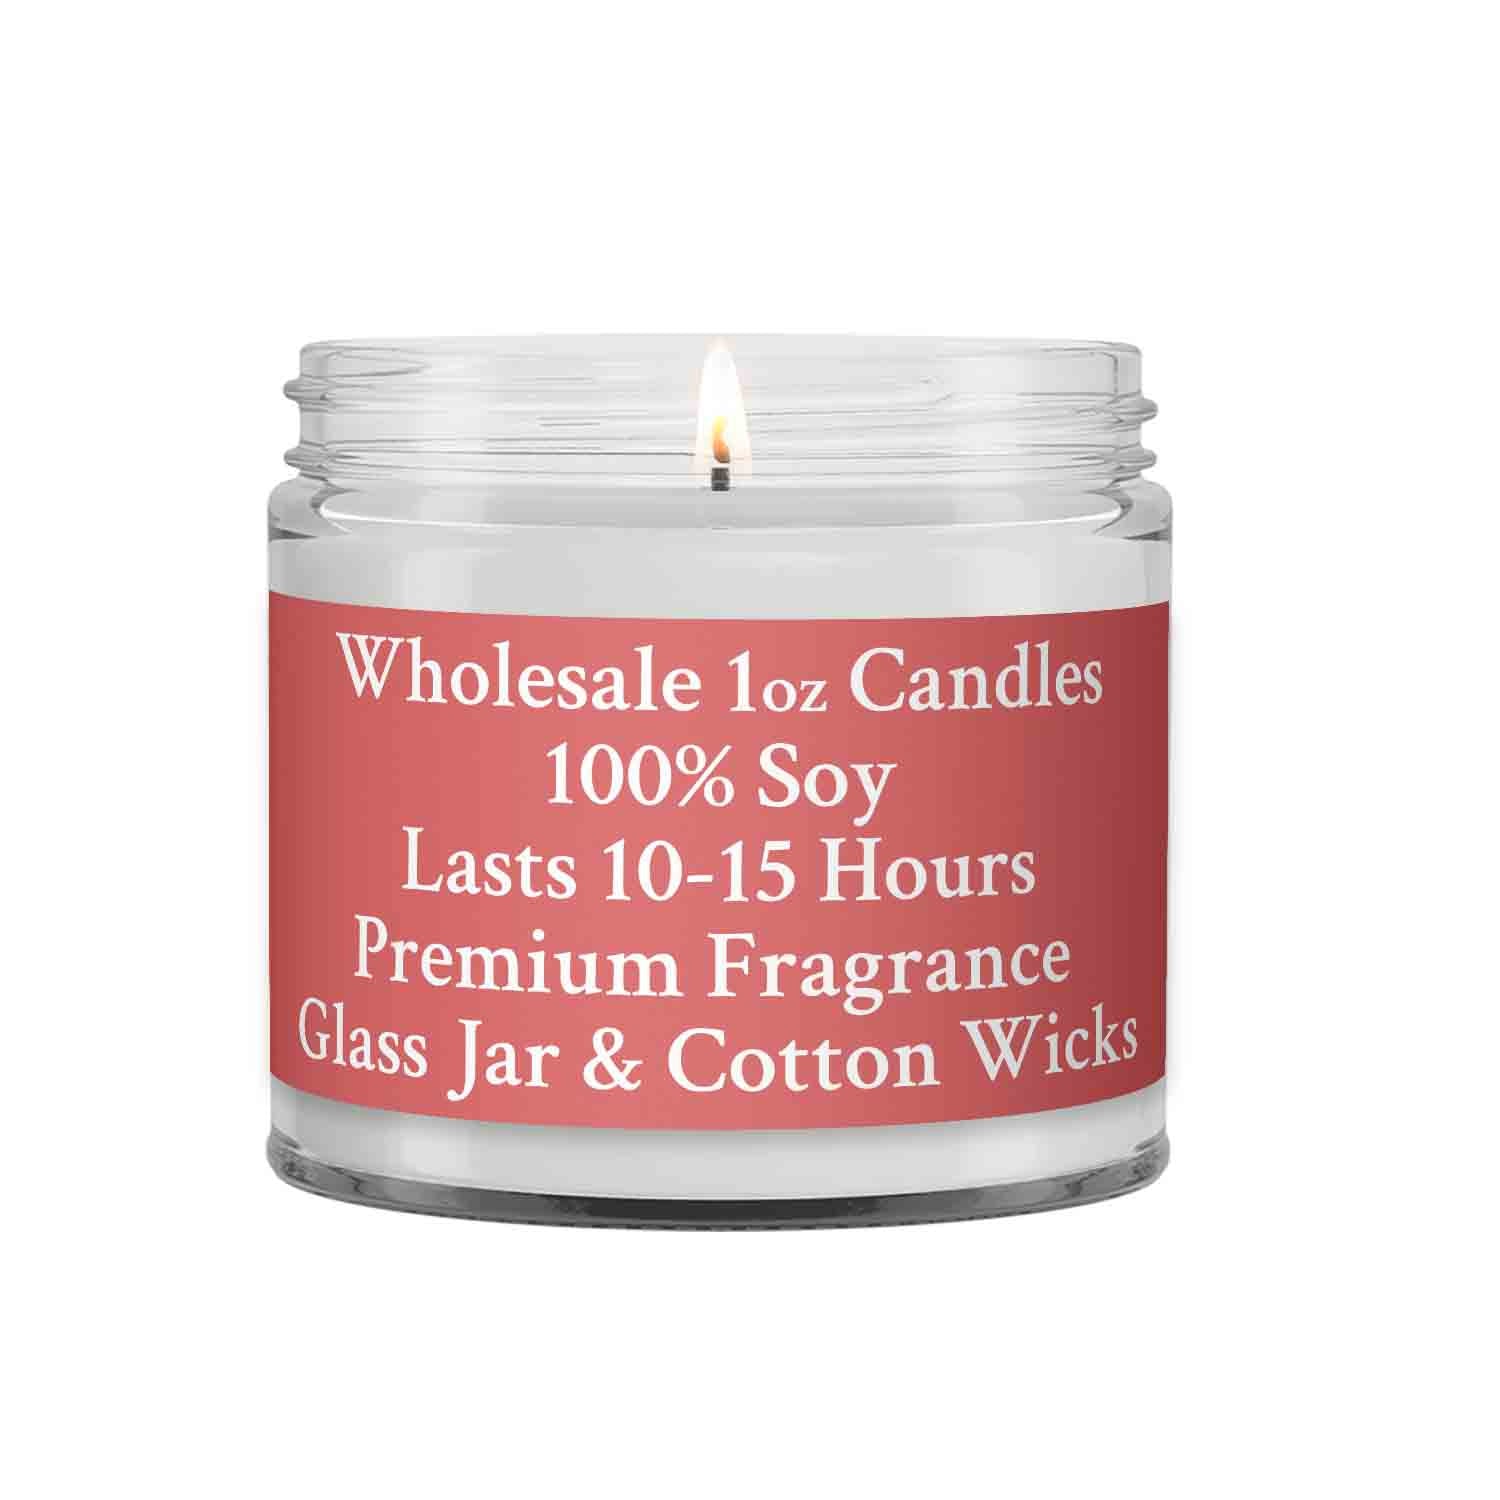 Wholesale carved candles priced For Subtle Scents And Fragrances 